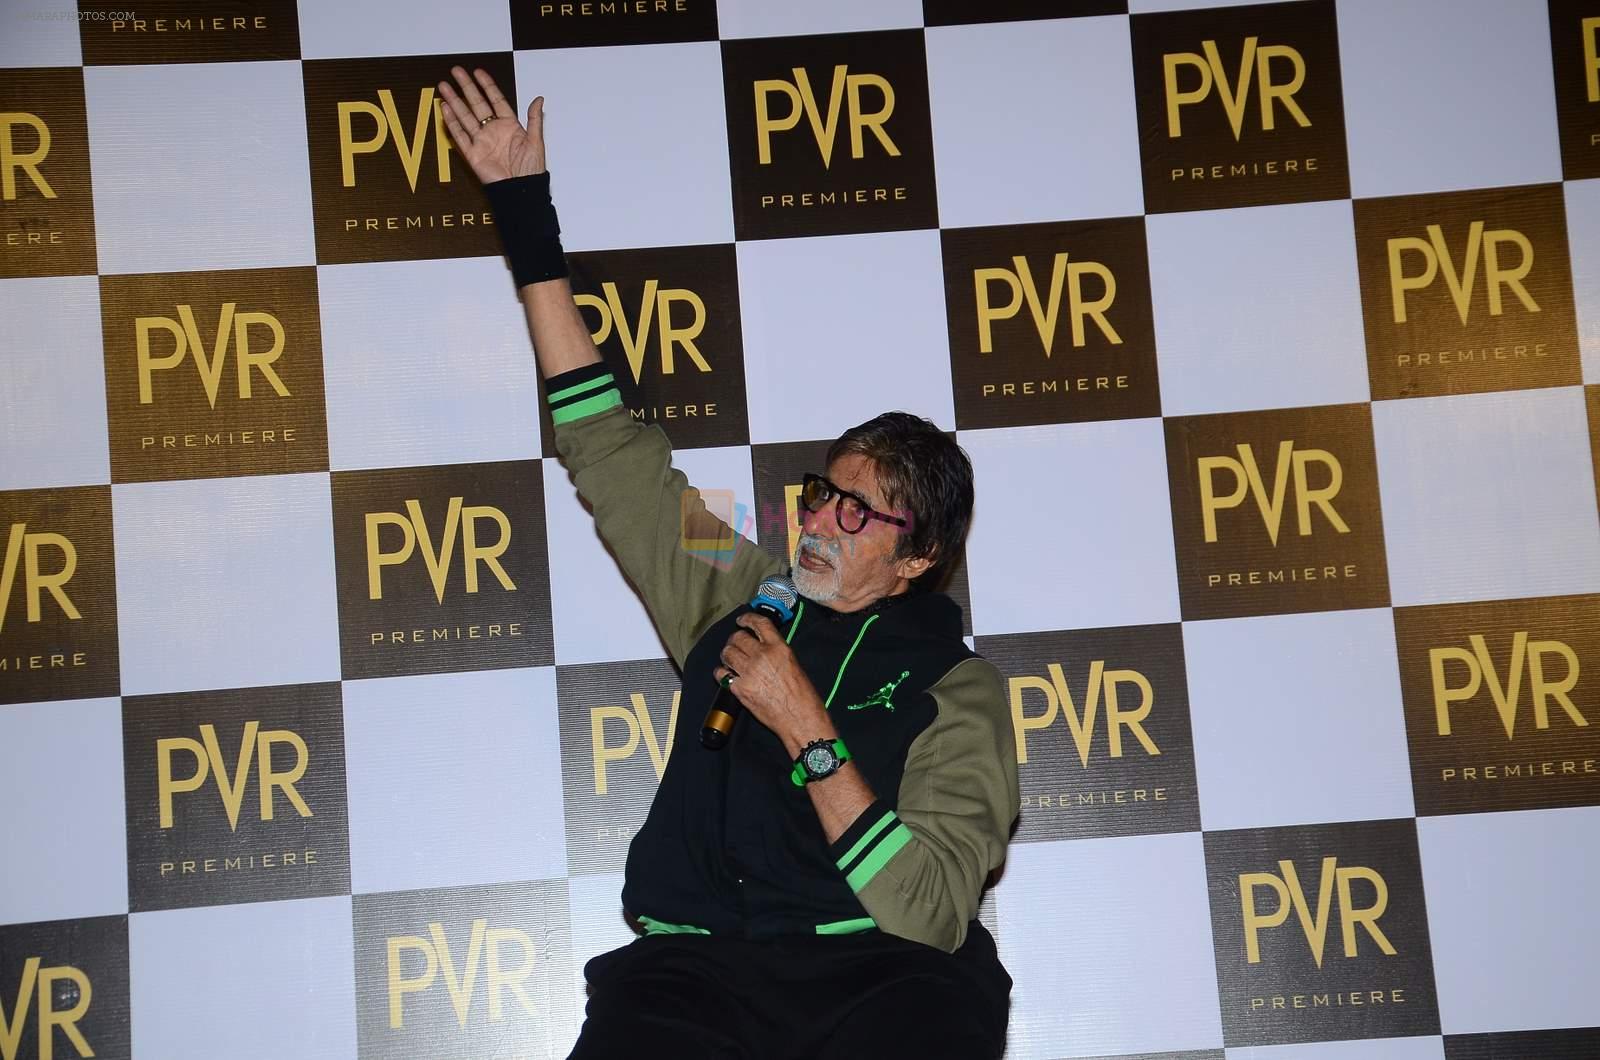 Amitabh Bachchan at Sholay 40 years celebrations press meet in PVR, Juhu on 14th Aug 2015